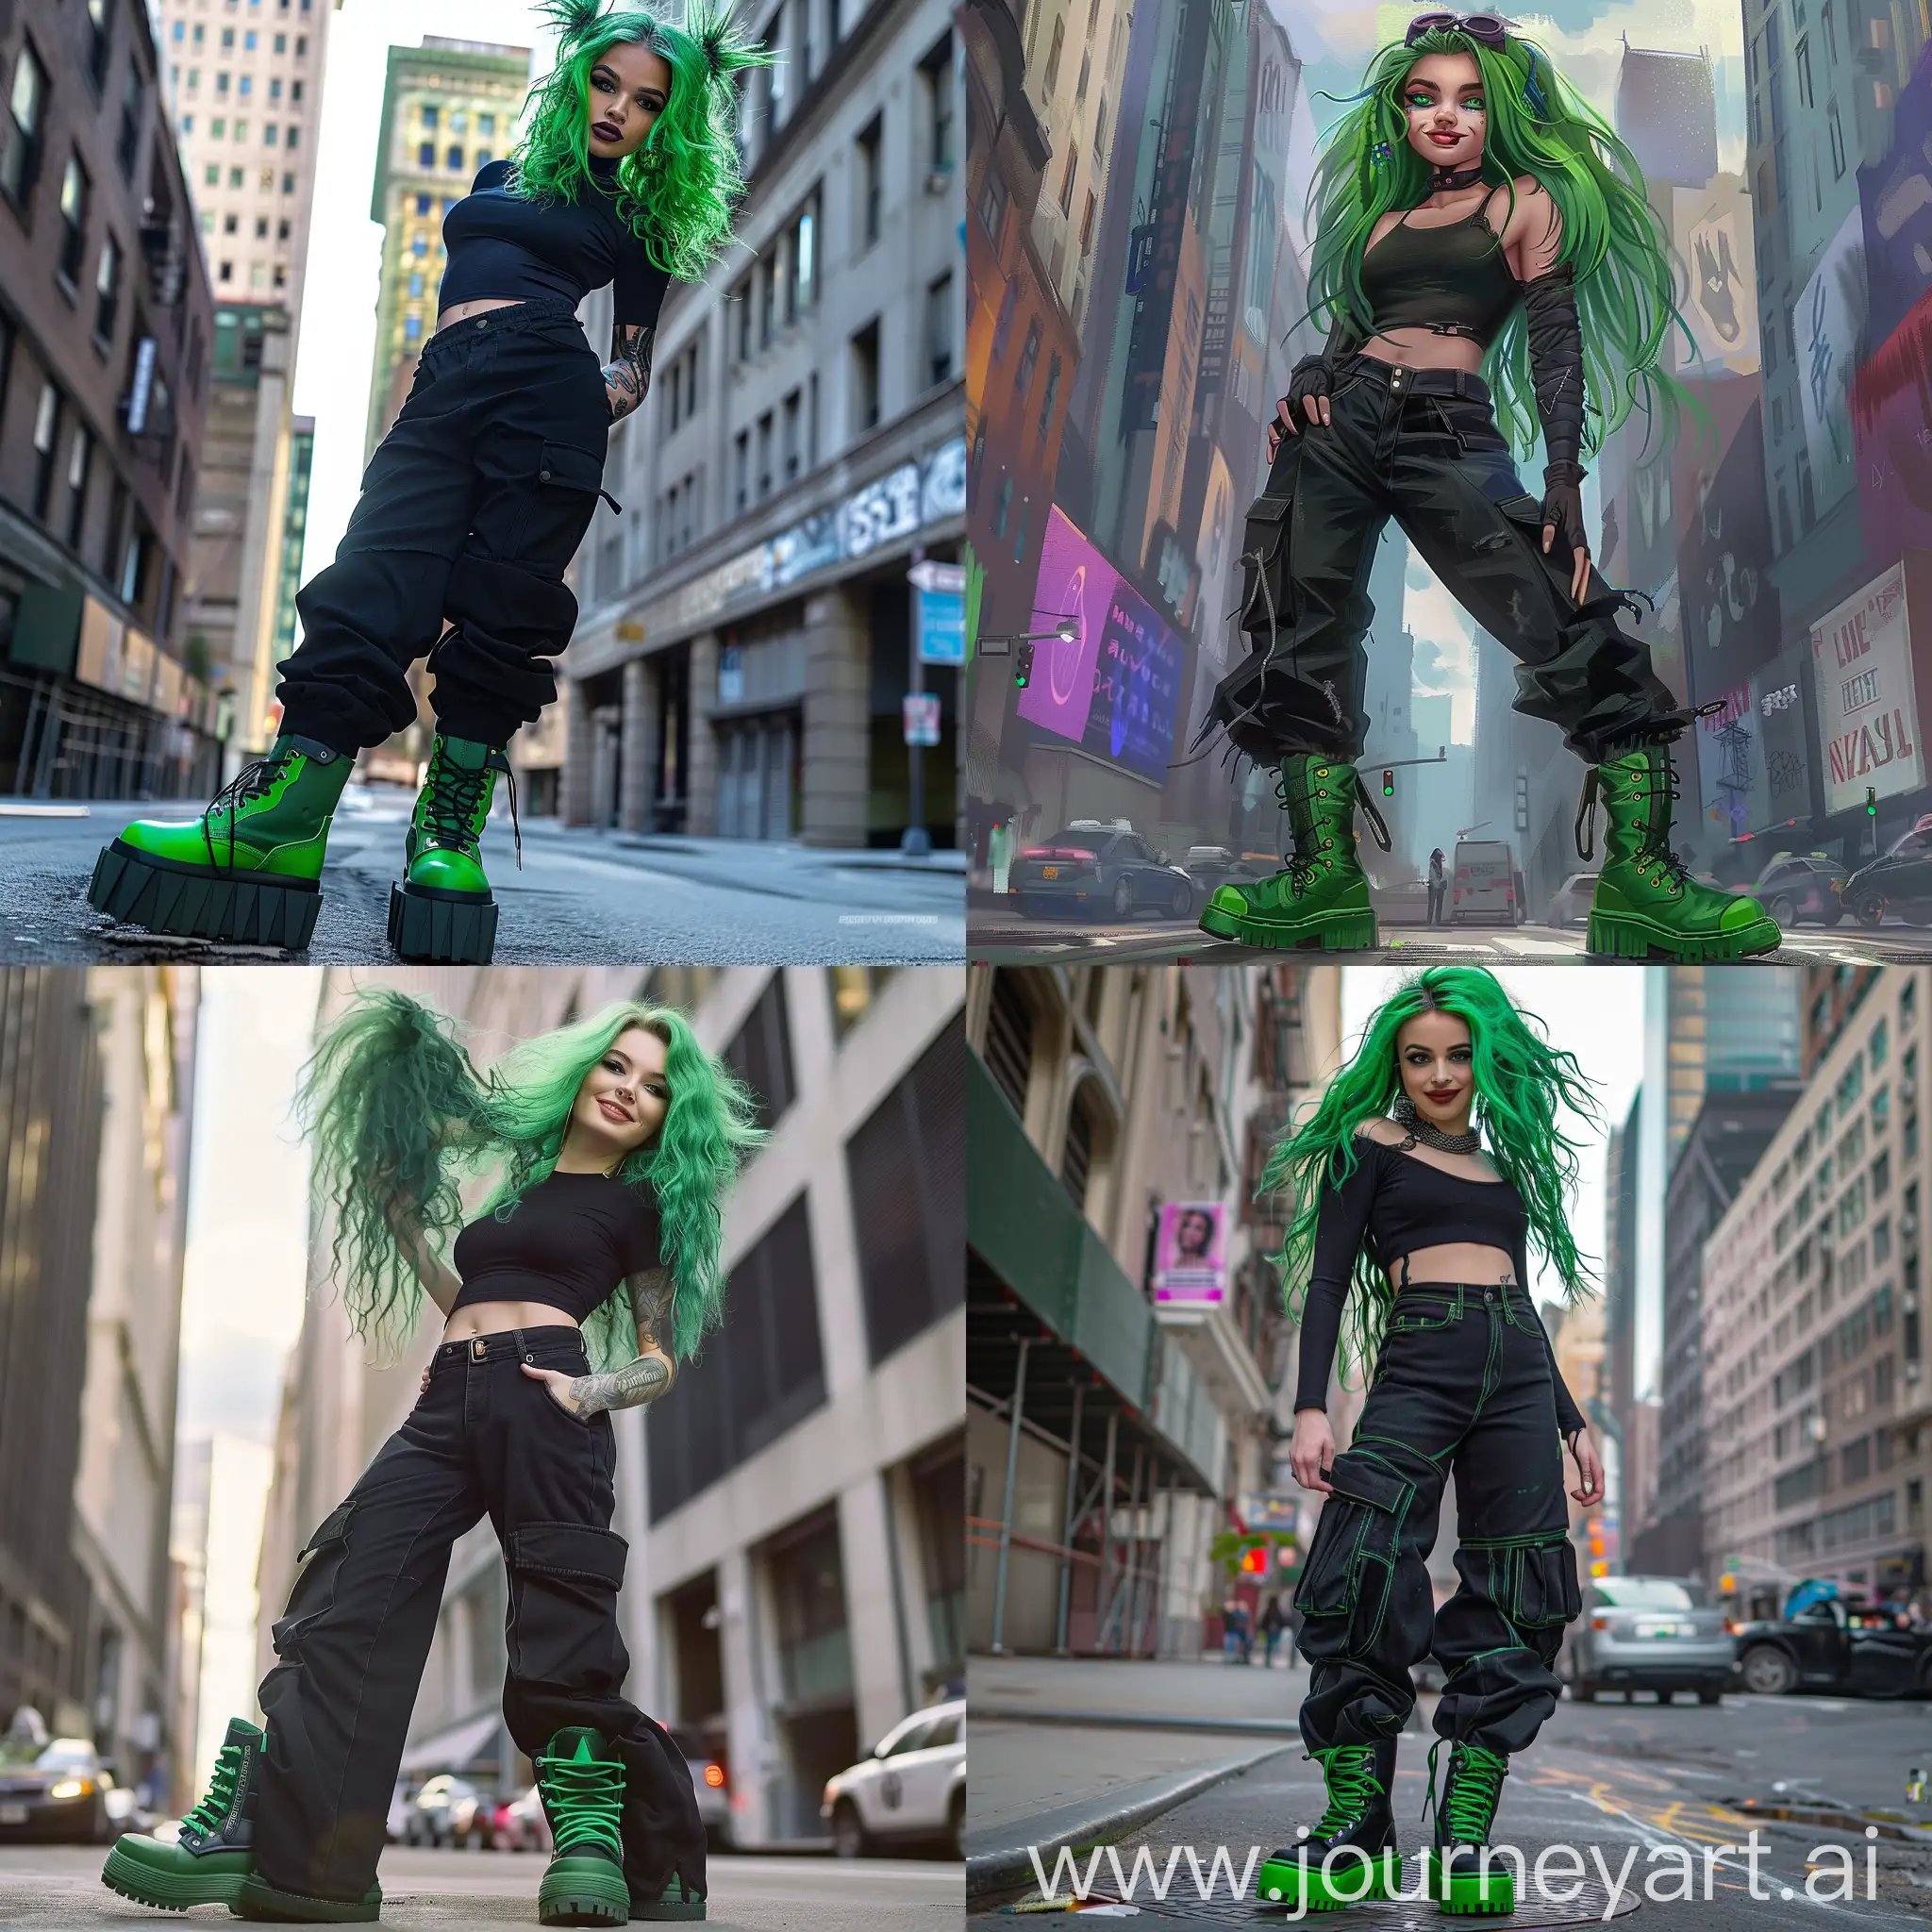 Confident-Woman-with-Messy-Green-Hair-in-Urban-Setting